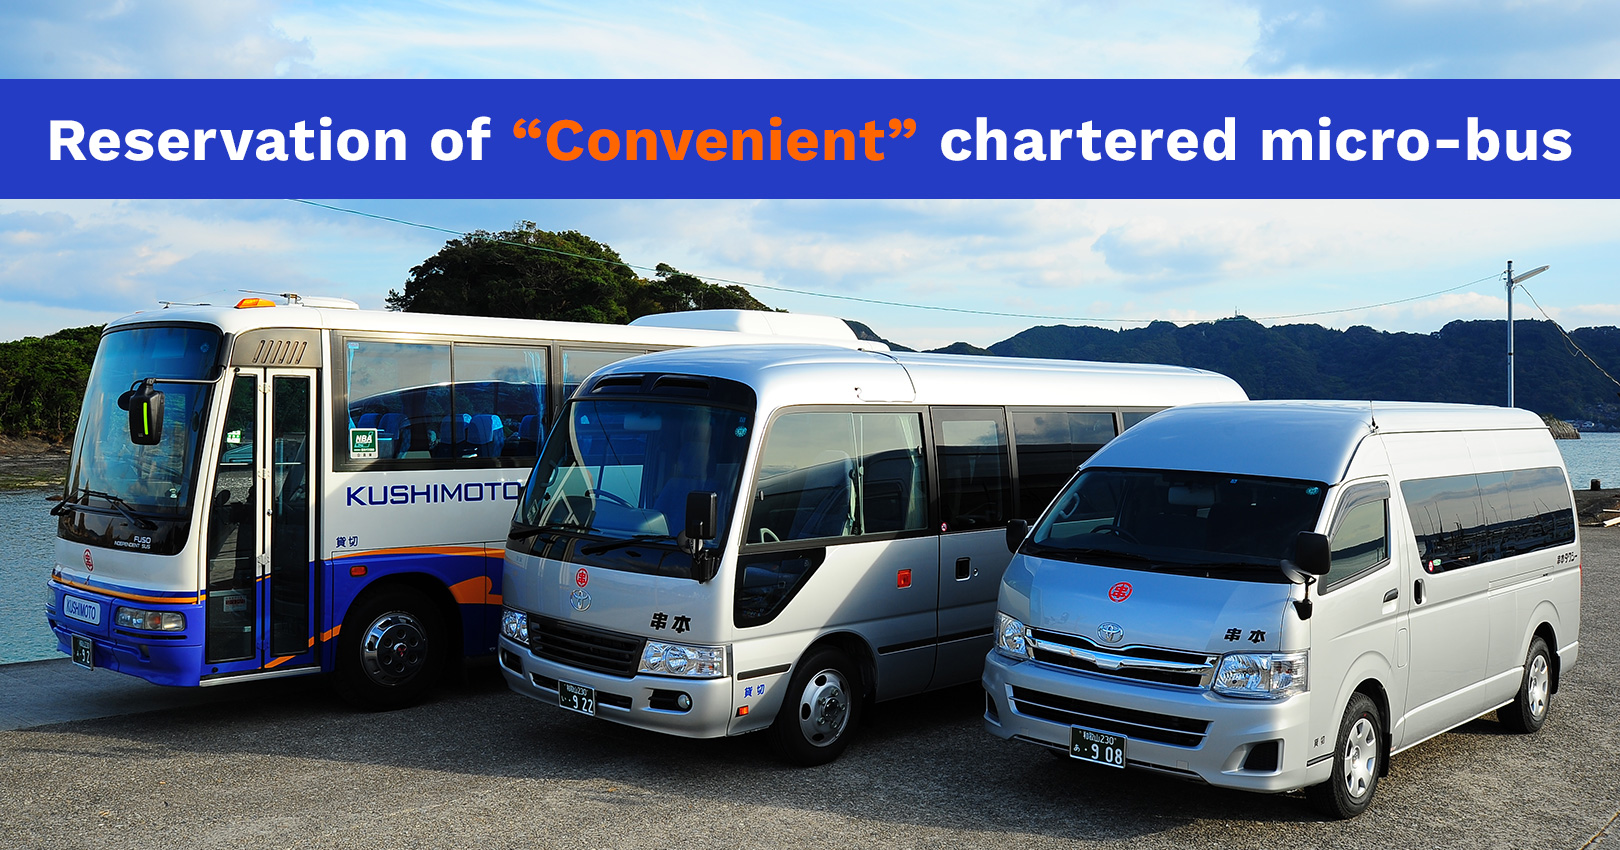 Reservation of “Convenient” chartered micro-bus